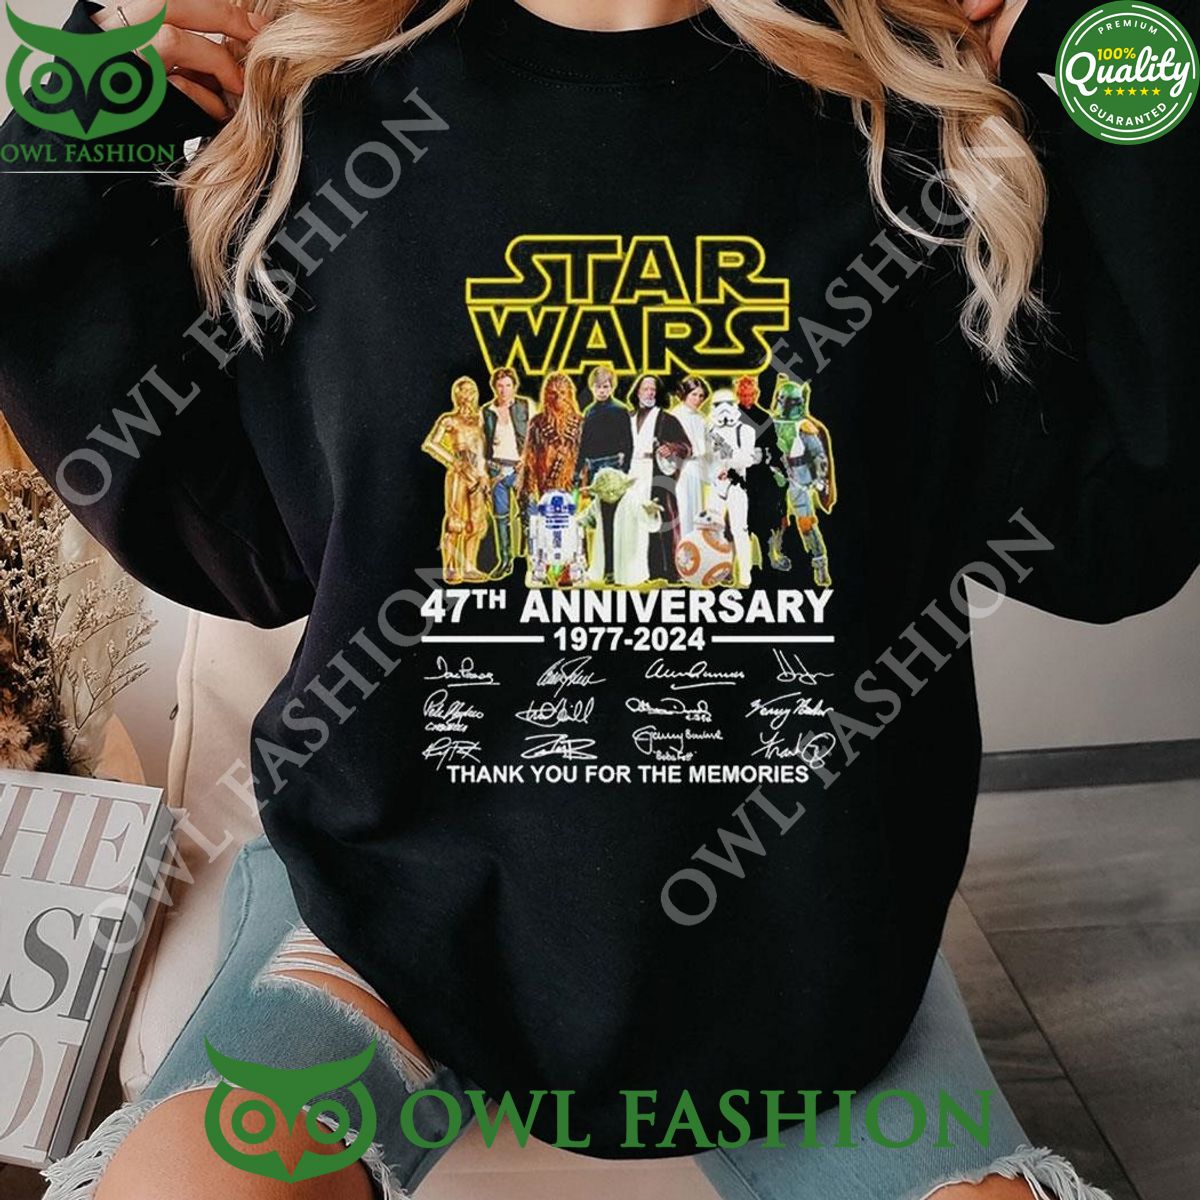 Star Wars 47th Anniversary 1977 2024 Signatures Thank You For The Memories Tshirt Hoodie